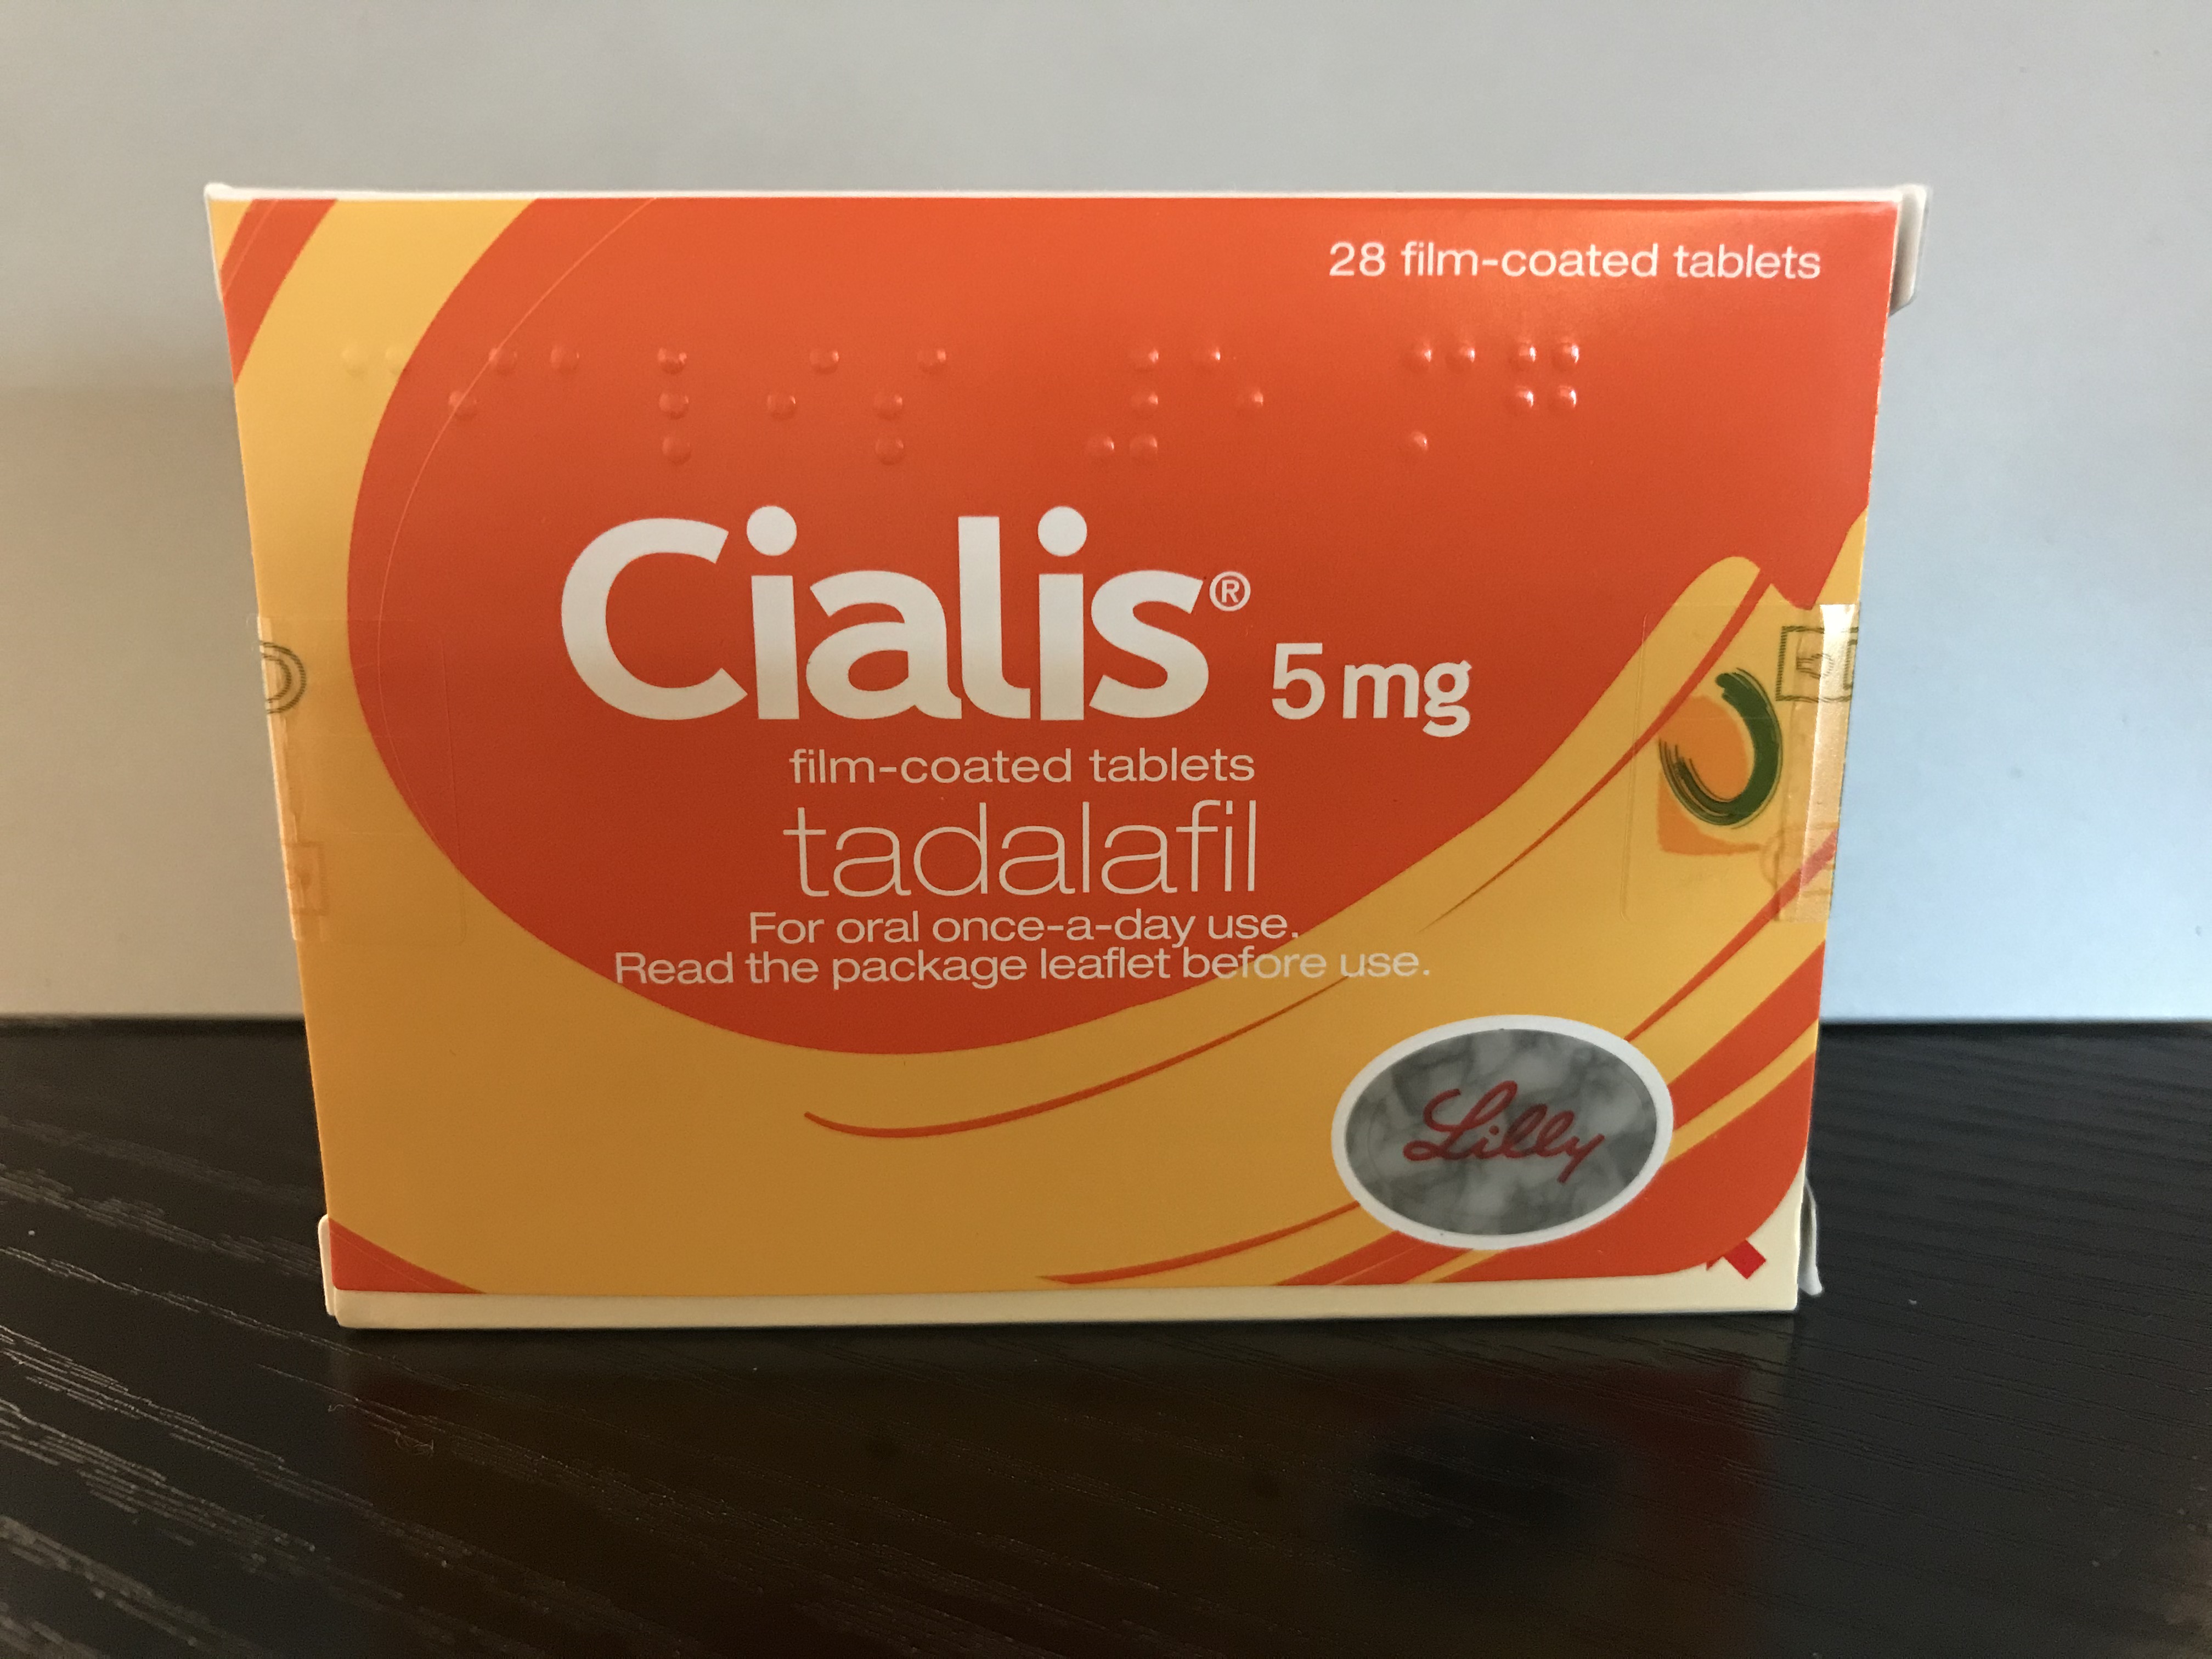 generic-cialis-is-now-helping-men-deal-with-their-problems-of-erectile